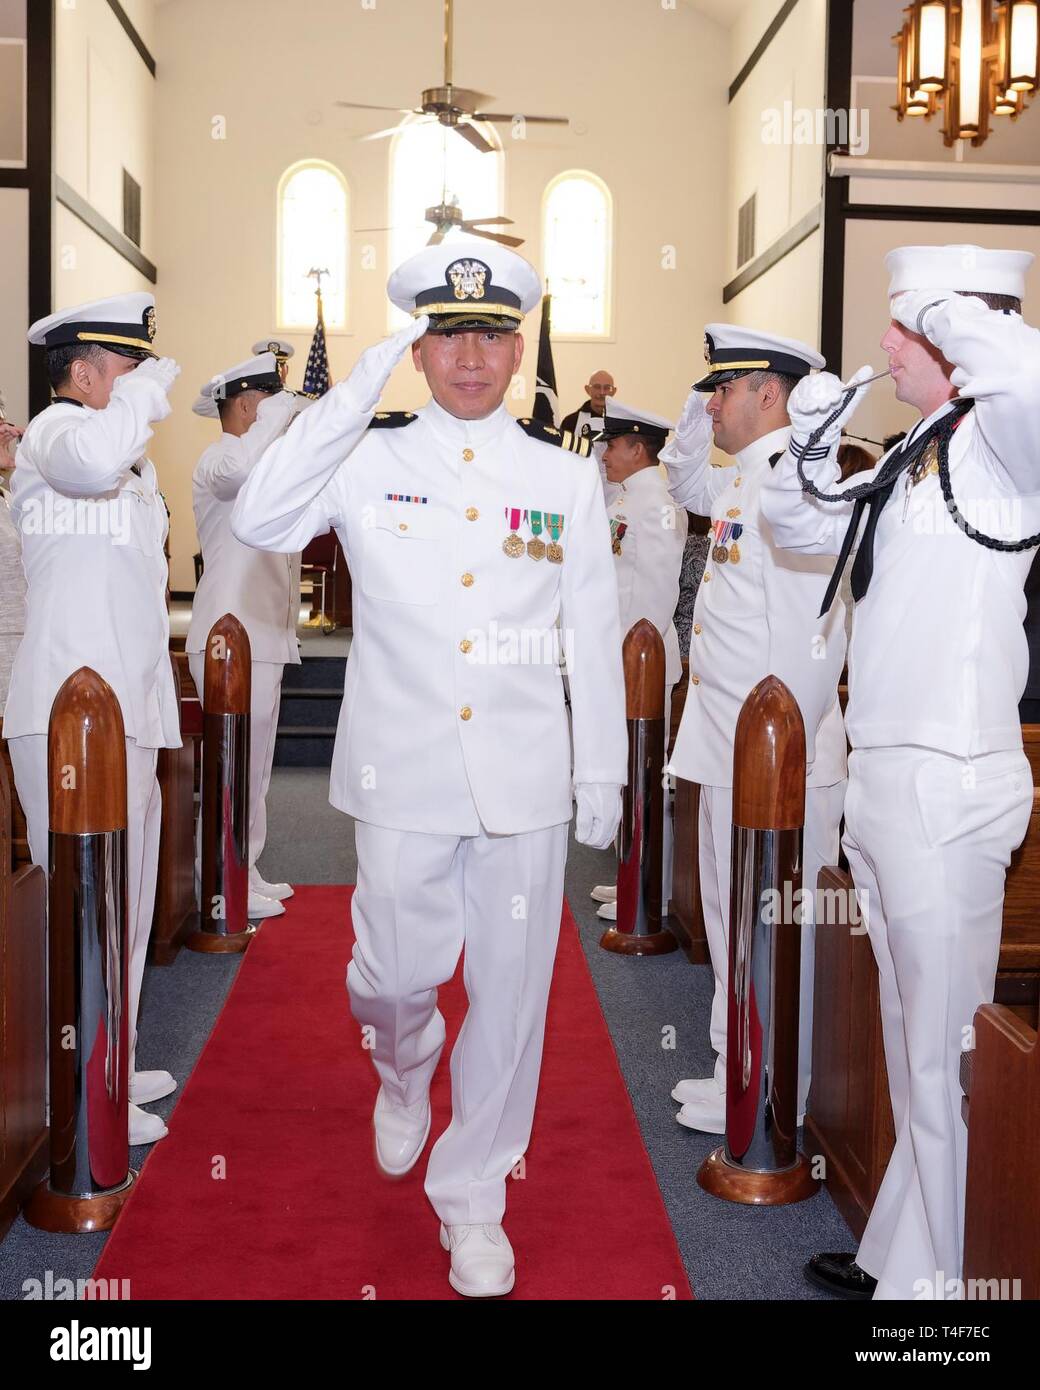 Lt. Cmdr. Felix Villanueva, assigned to Navy Medicine West, goes ashore for the last time at the conclusion of his retirement ceremony at the Chapel aboard Navy Station San Diego. Lt. Cmdr. Villanueva concluded a 28 year career on 11 April 2019 in a small ceremony surround by his family, friends, and closest colleagues. Stock Photo